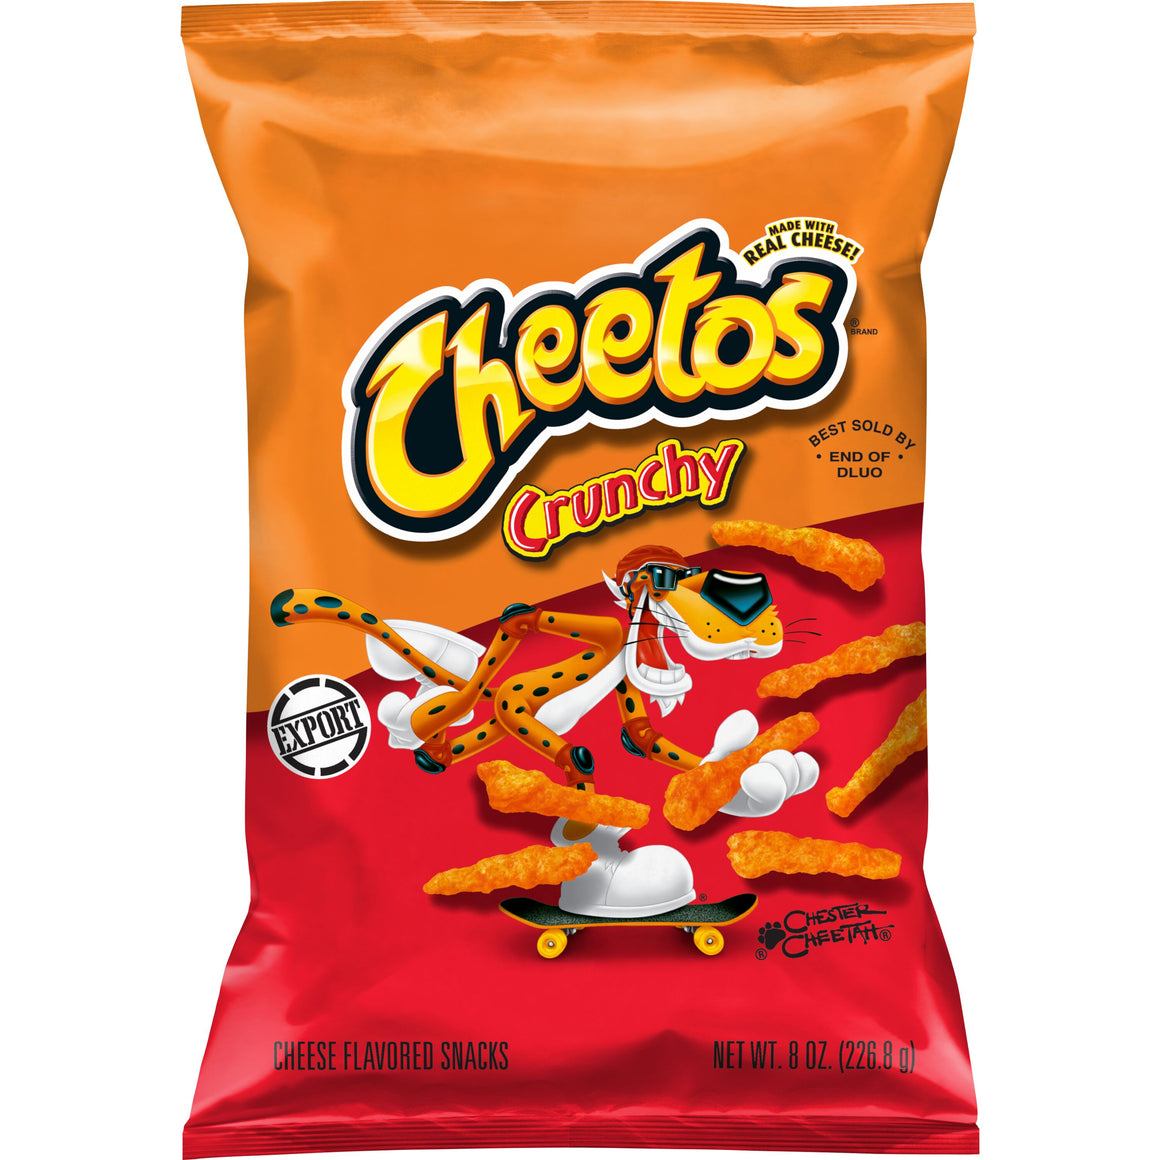 Cheetos Crunchy Cheese Flavored Snacks, Made with Real Cheese, 8 OZ (227g) - Export